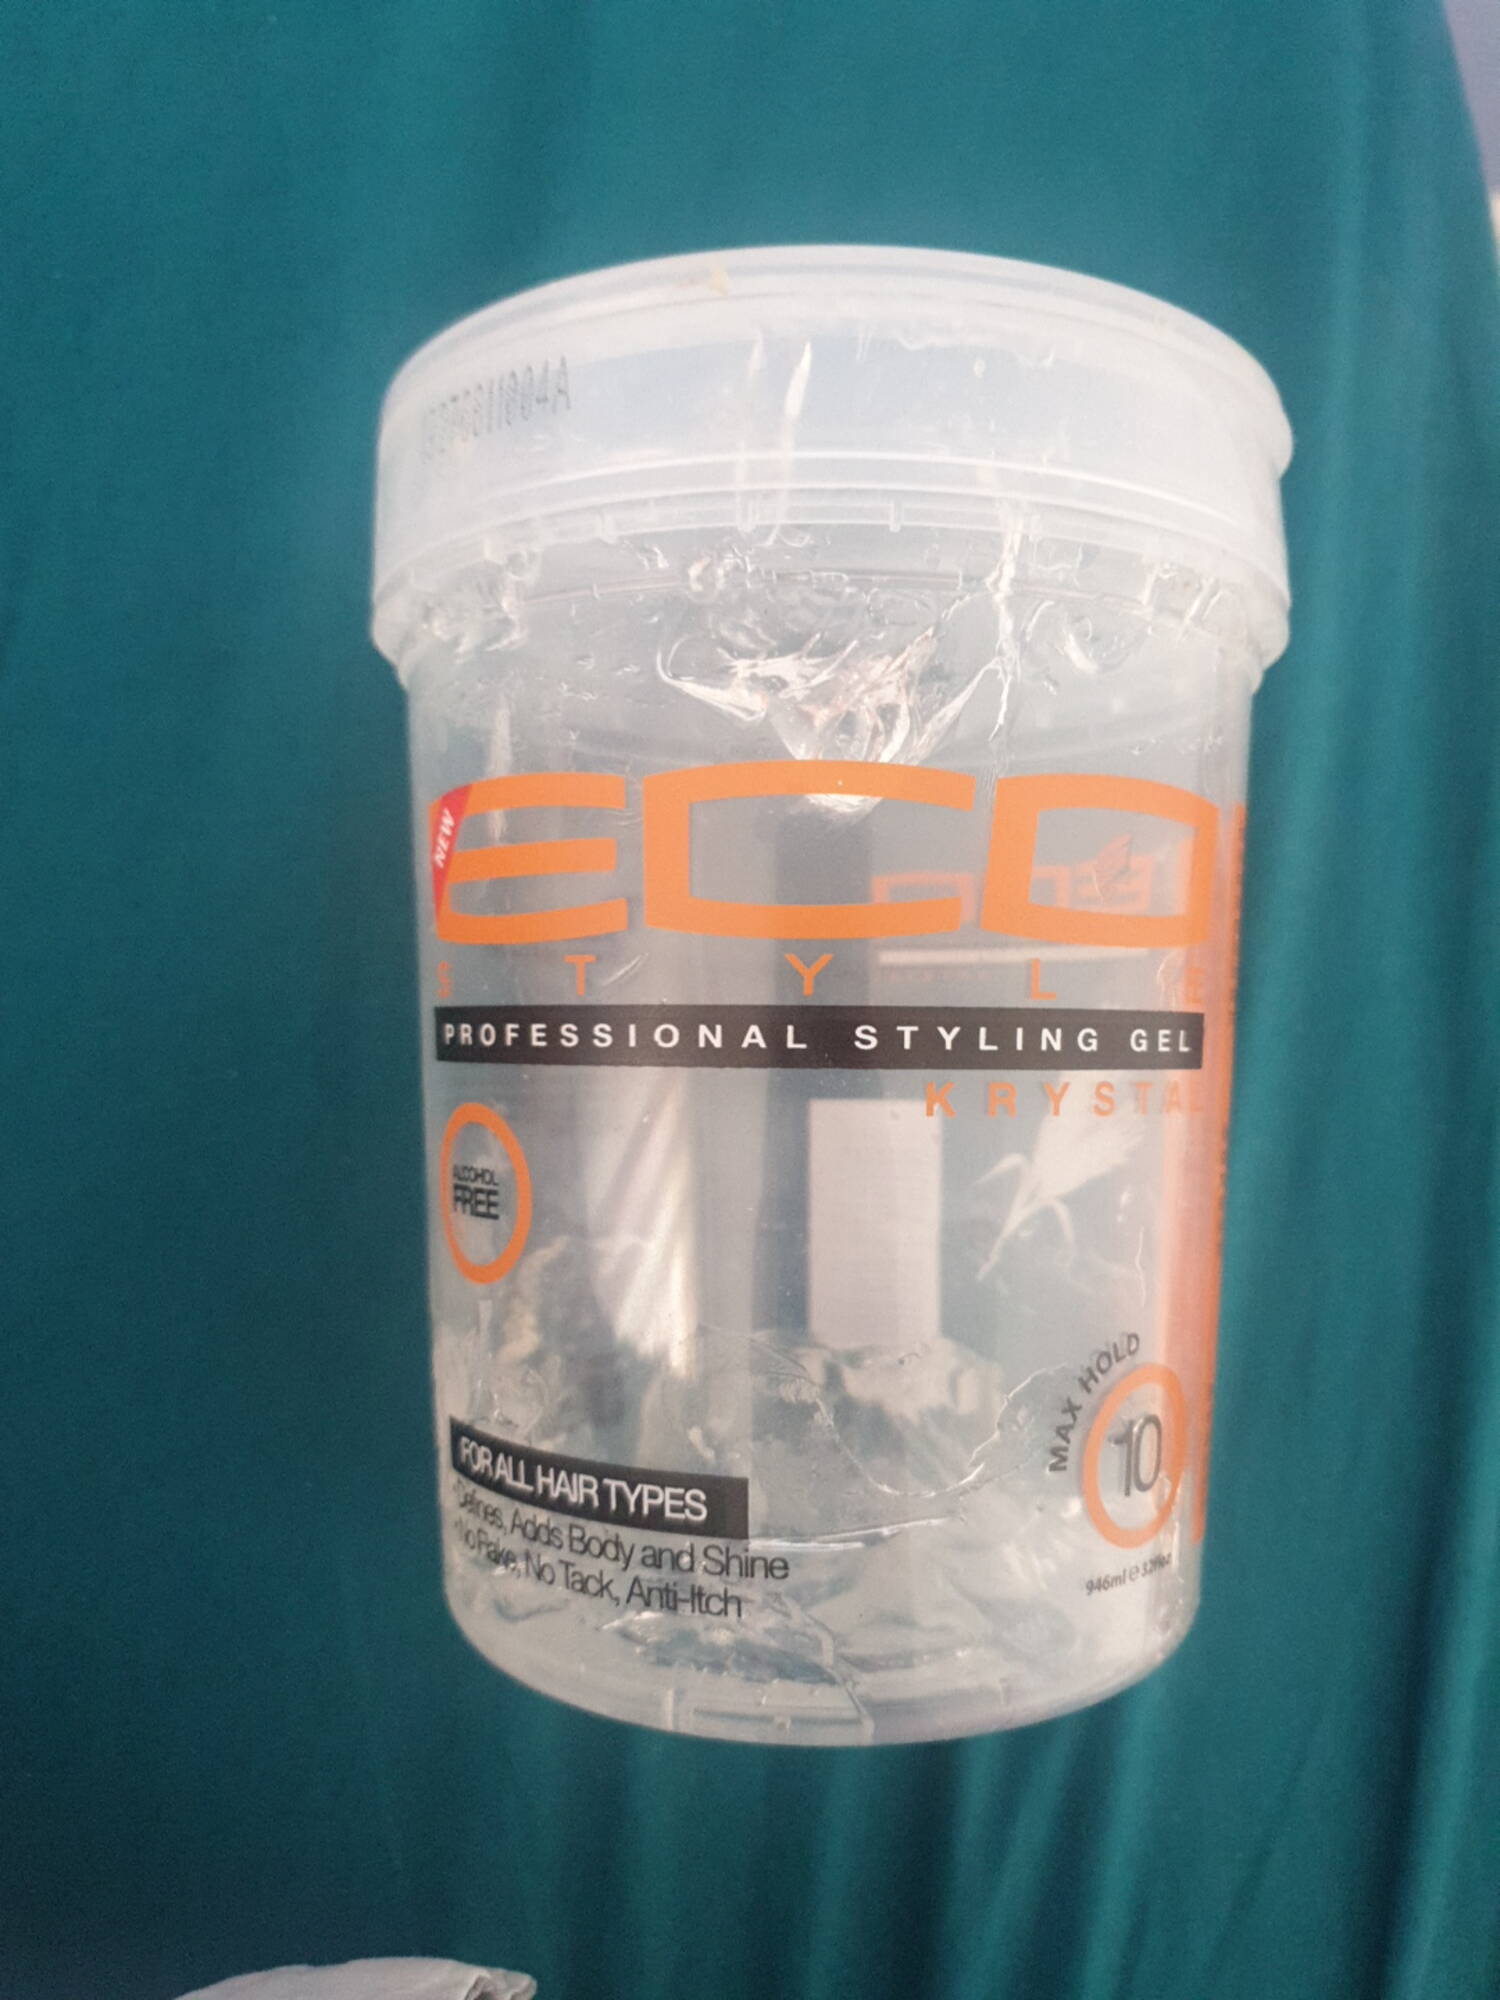 ECO STYLE - Professional styling gel max hold 10